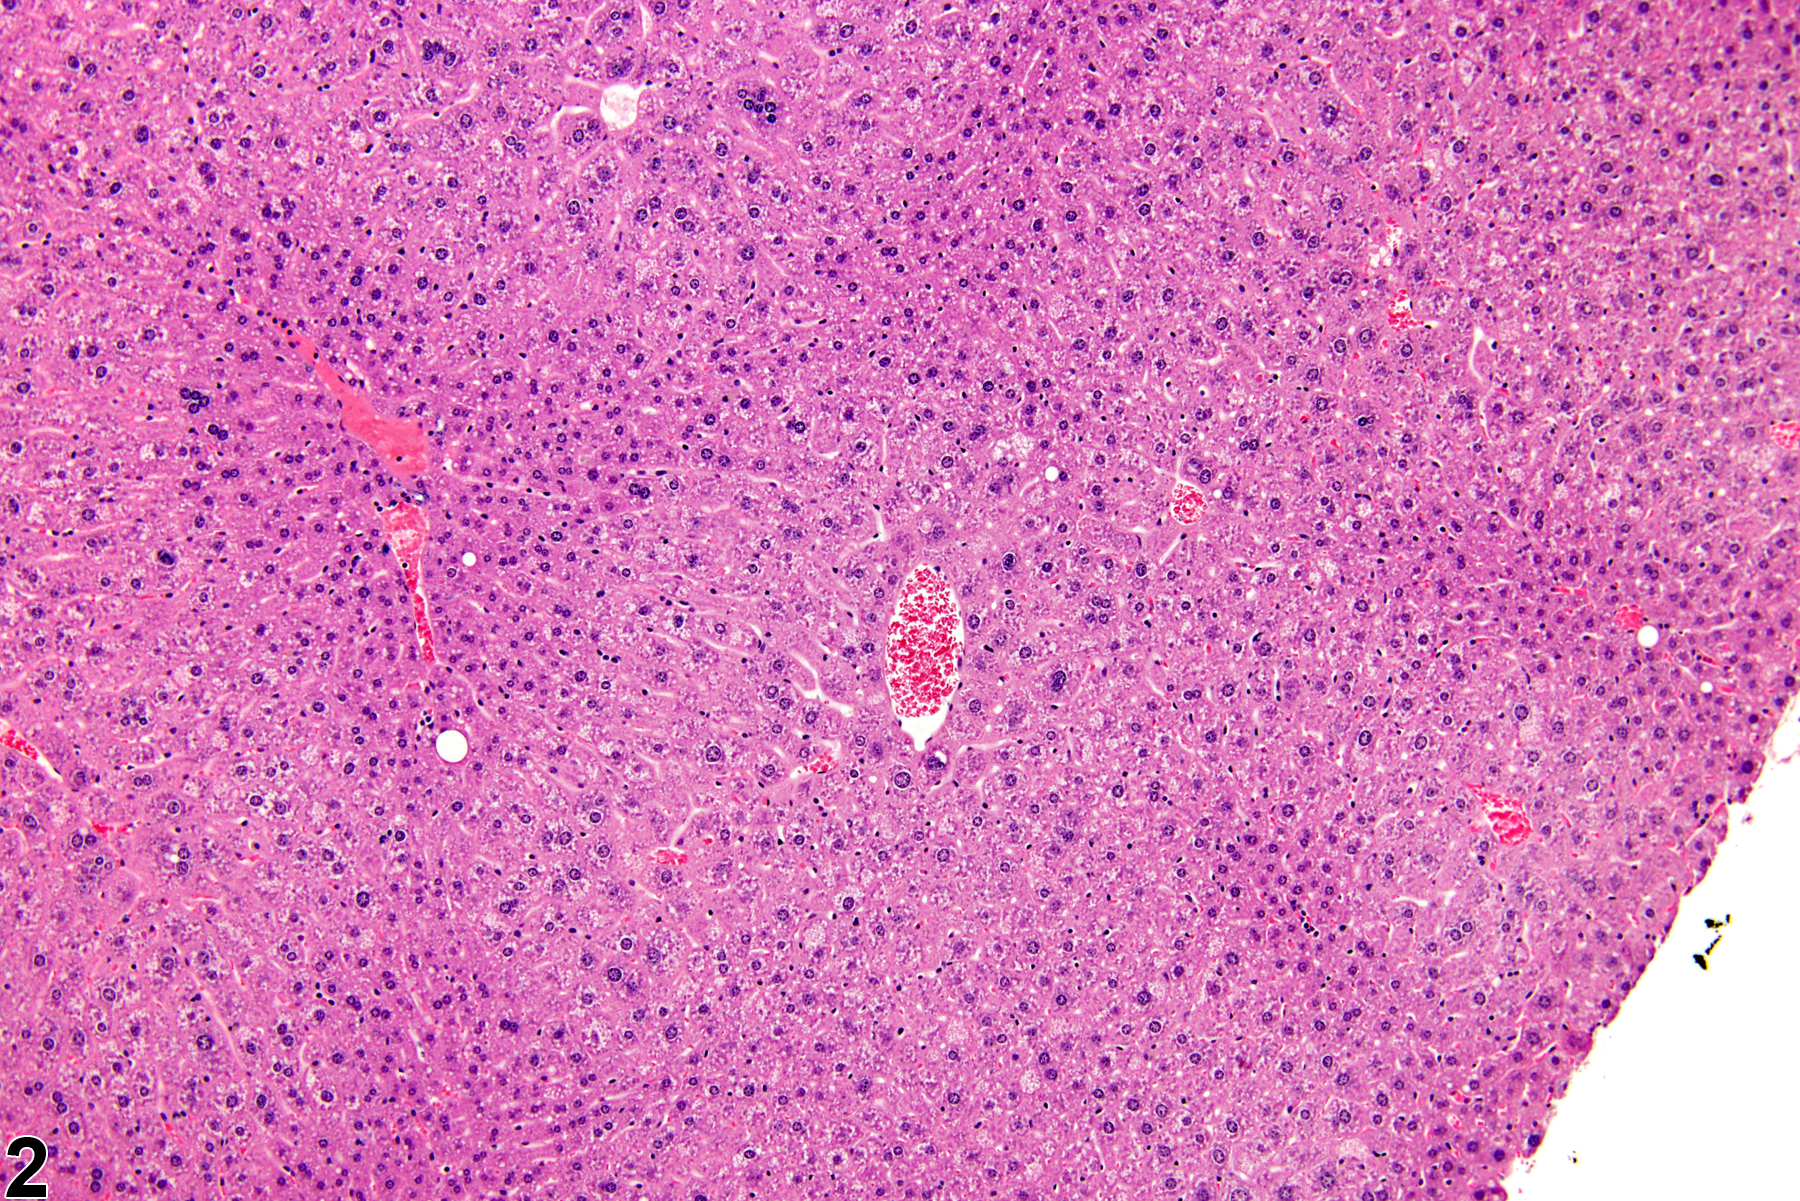 Image of hypertrophy in the liver from a male  B6C3F1 mouse in a chronic study